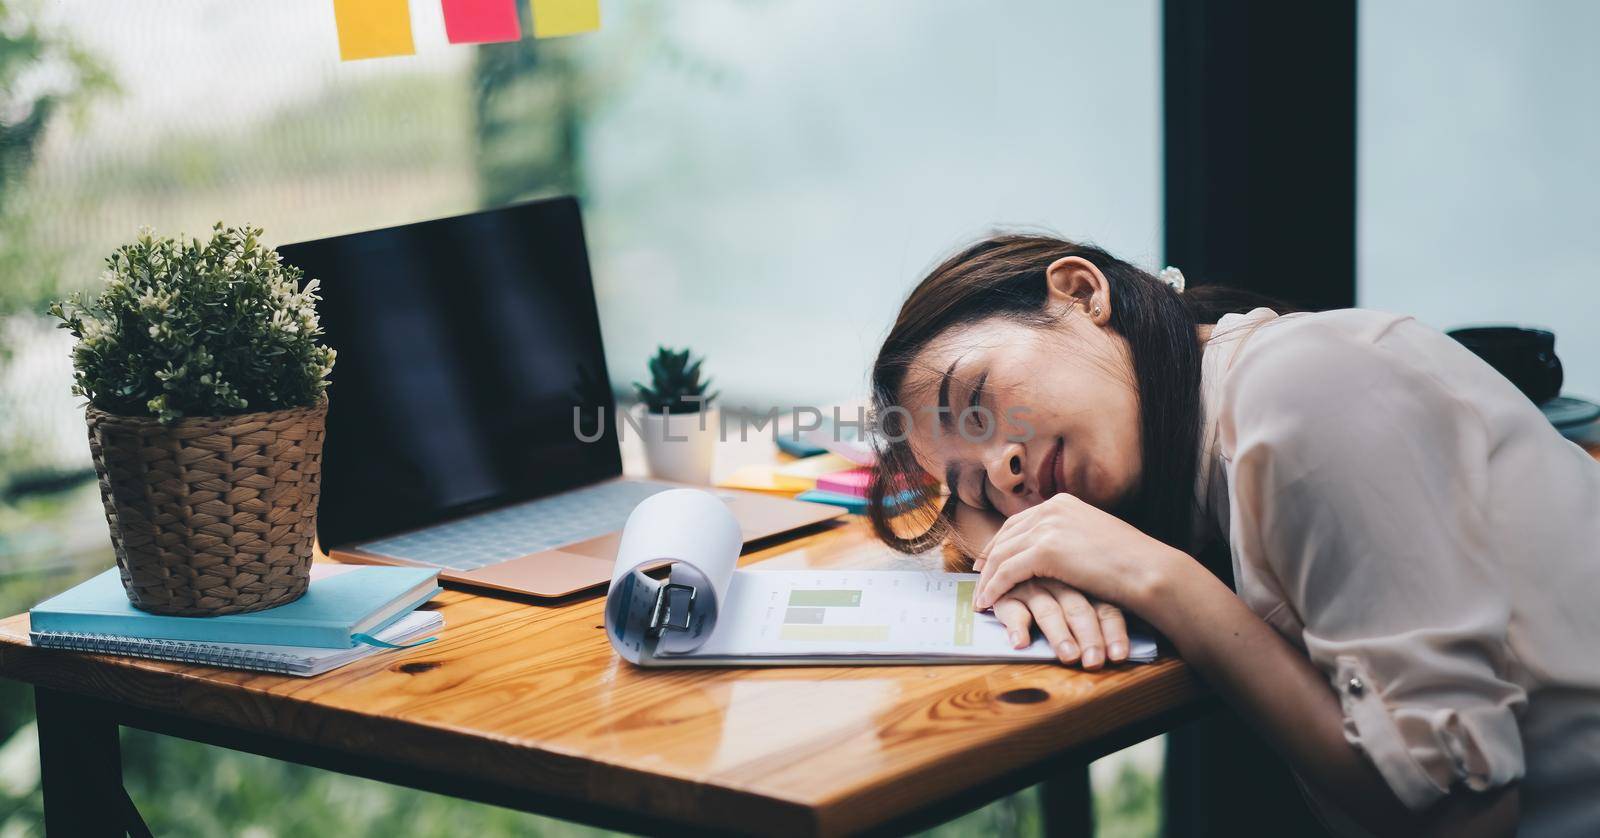 Tired and overworked business woman. Young exhausted girl sleeping on table during her work Entrepreneur, freelance worker in stress concept.